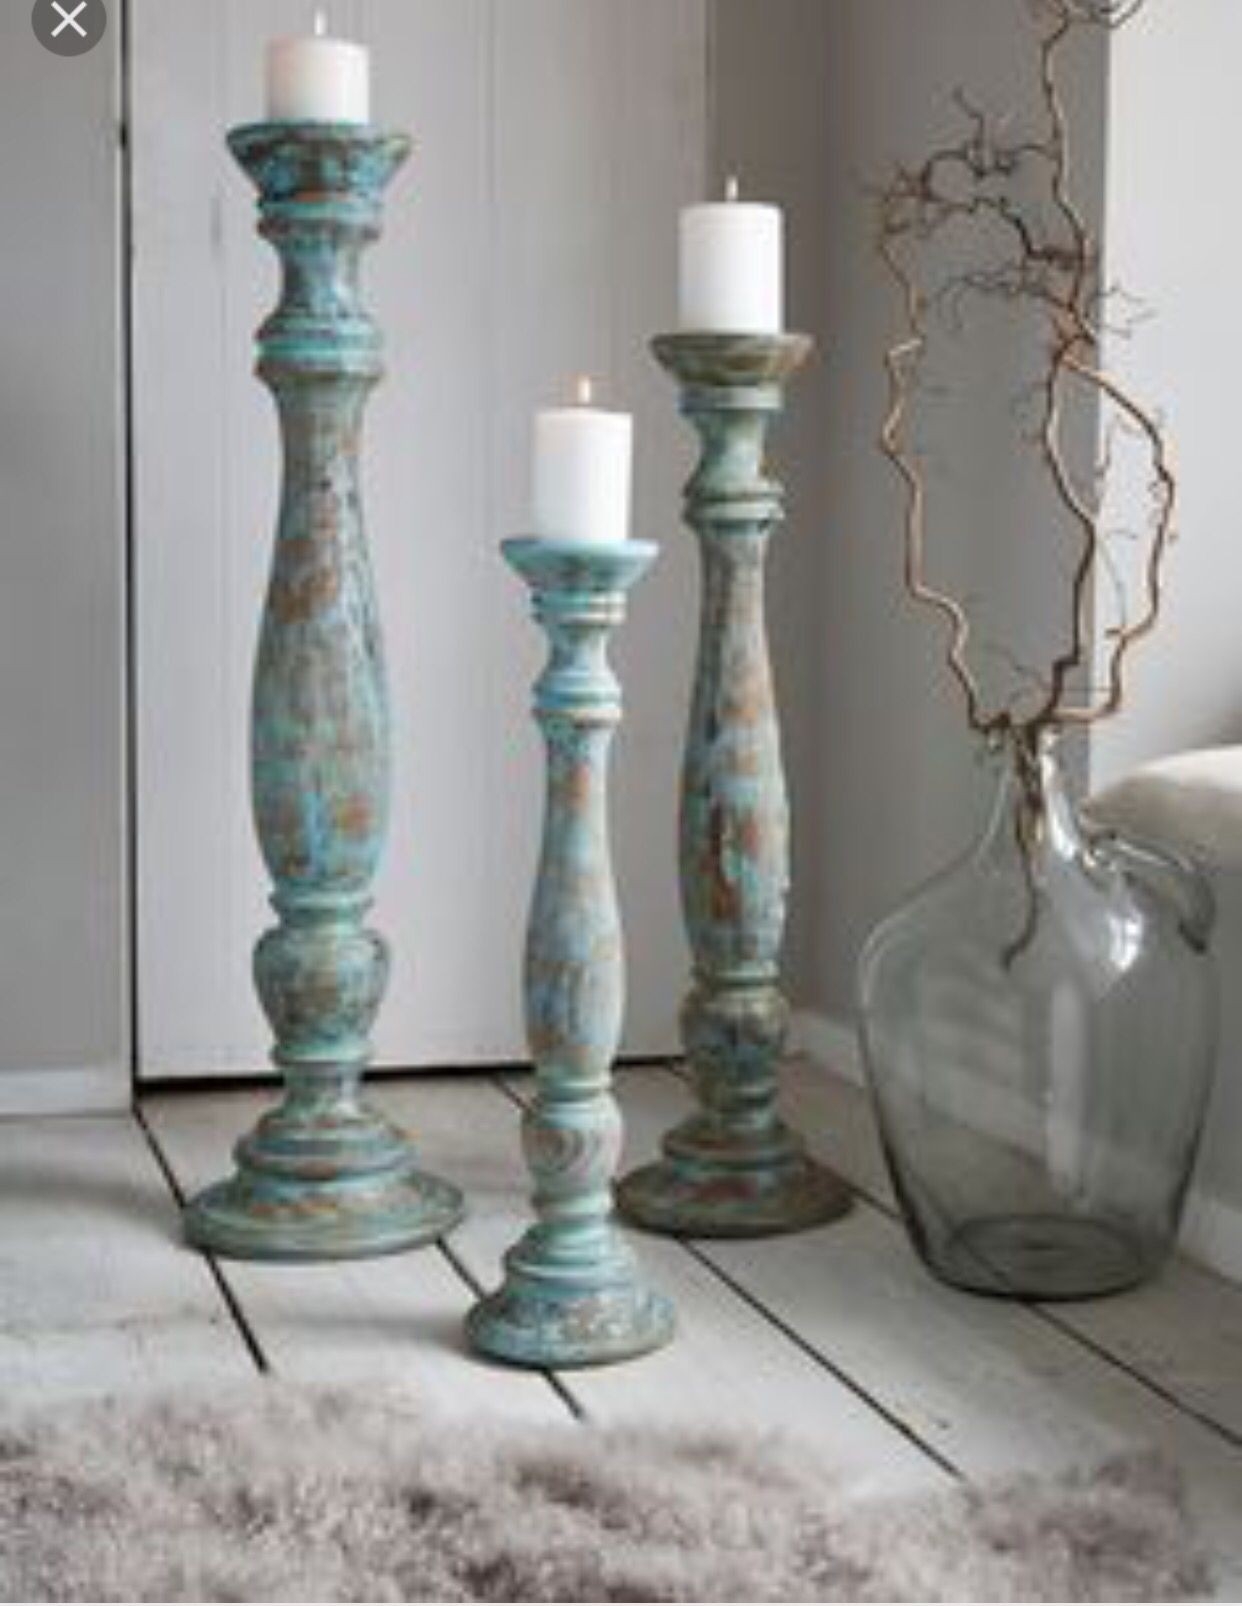 Extra Large Candle Holders - Foter